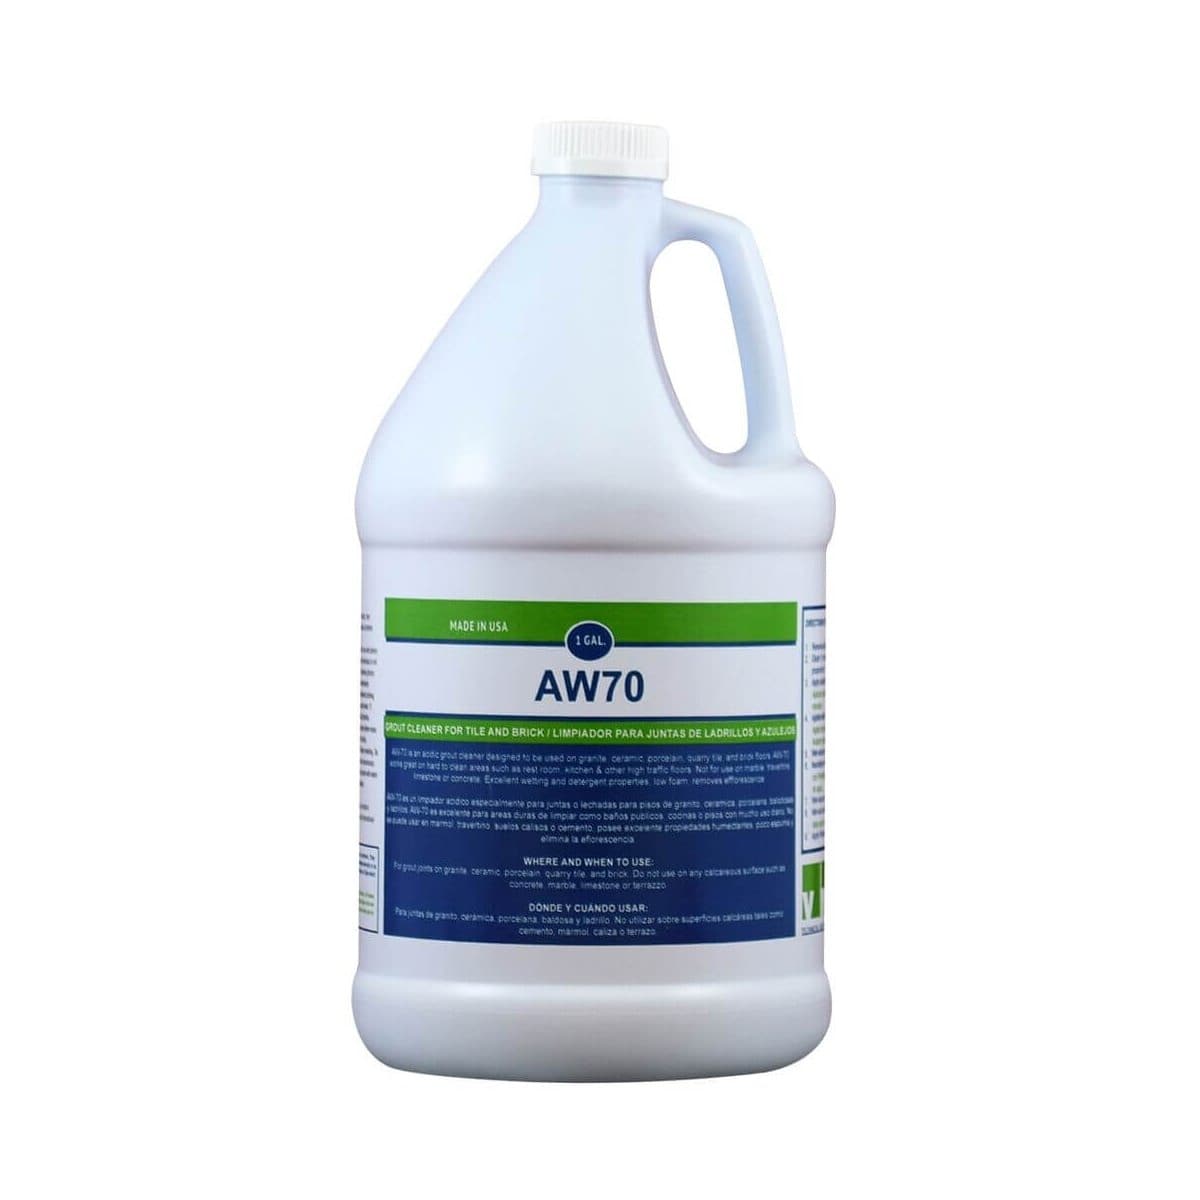 https://cdn.shopify.com/s/files/1/0551/8396/6382/products/vmc-aw70-acidic-grout-cleaner-1-gallon-692882.jpg?crop=center&height=1200&v=1694534156&width=1200